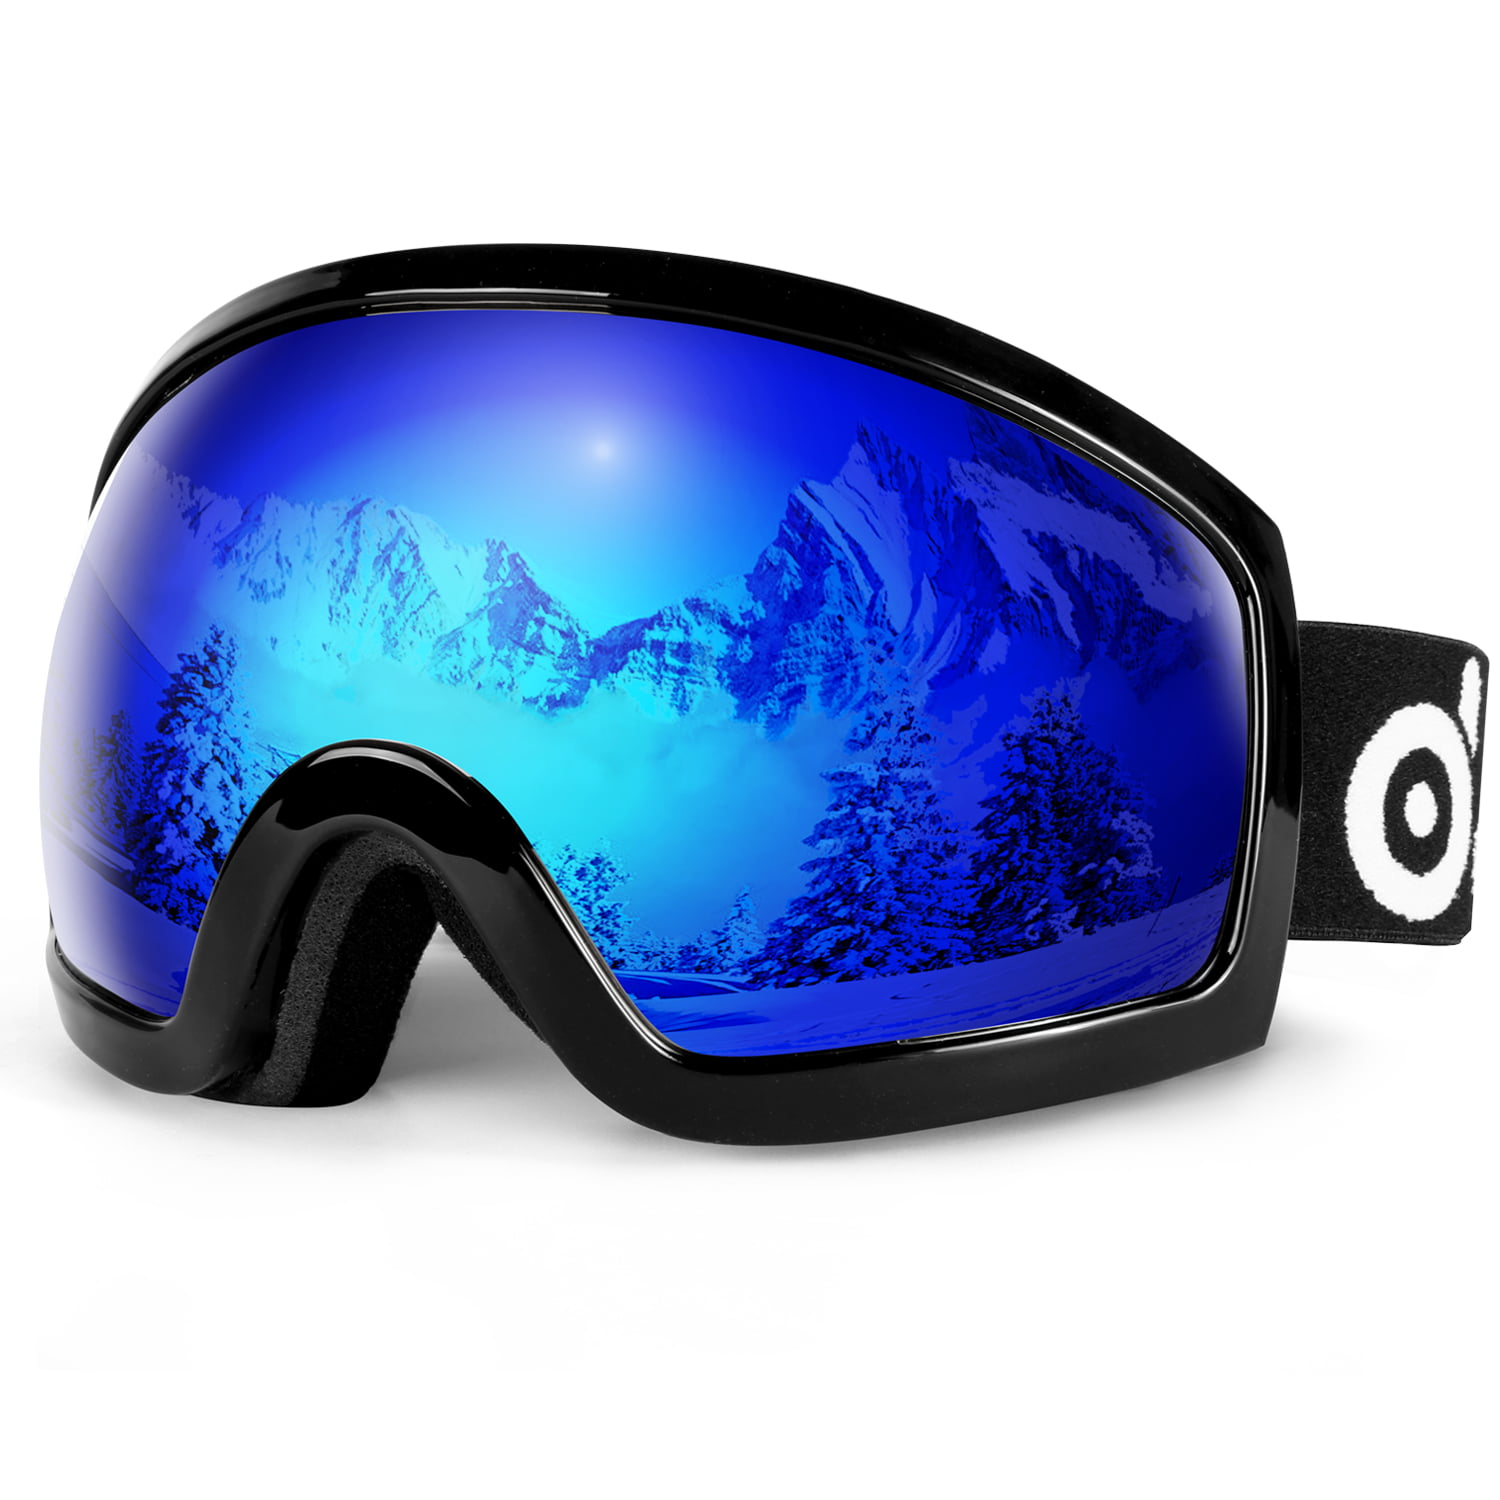 Skiing Odoland Snow Ski Helmet with Goggles Set Snowmobile Adjustable Sport Helmet with Protective Glasses for Men and Women- Windproof Adult and Youth Skiing Gear for Snowboarding